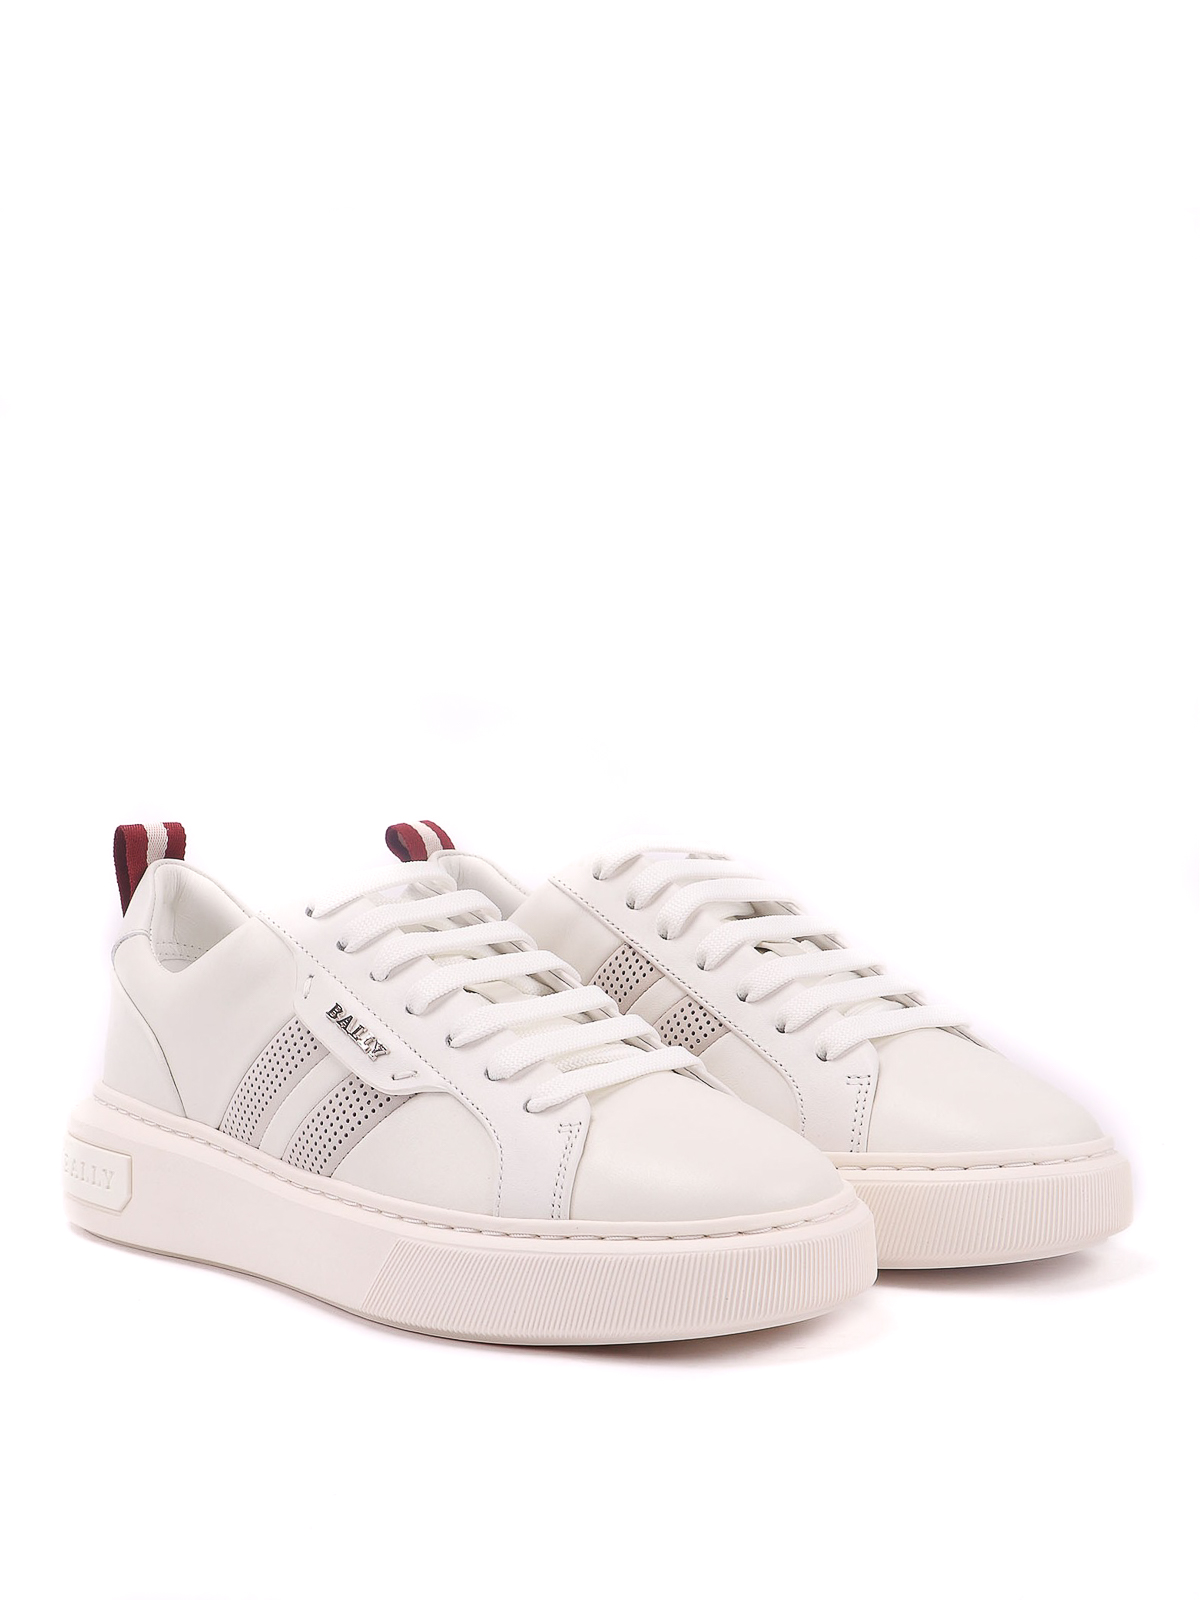 Trainers Bally - Maxim sneakers - MAXIMW0300 | Shop online at iKRIX